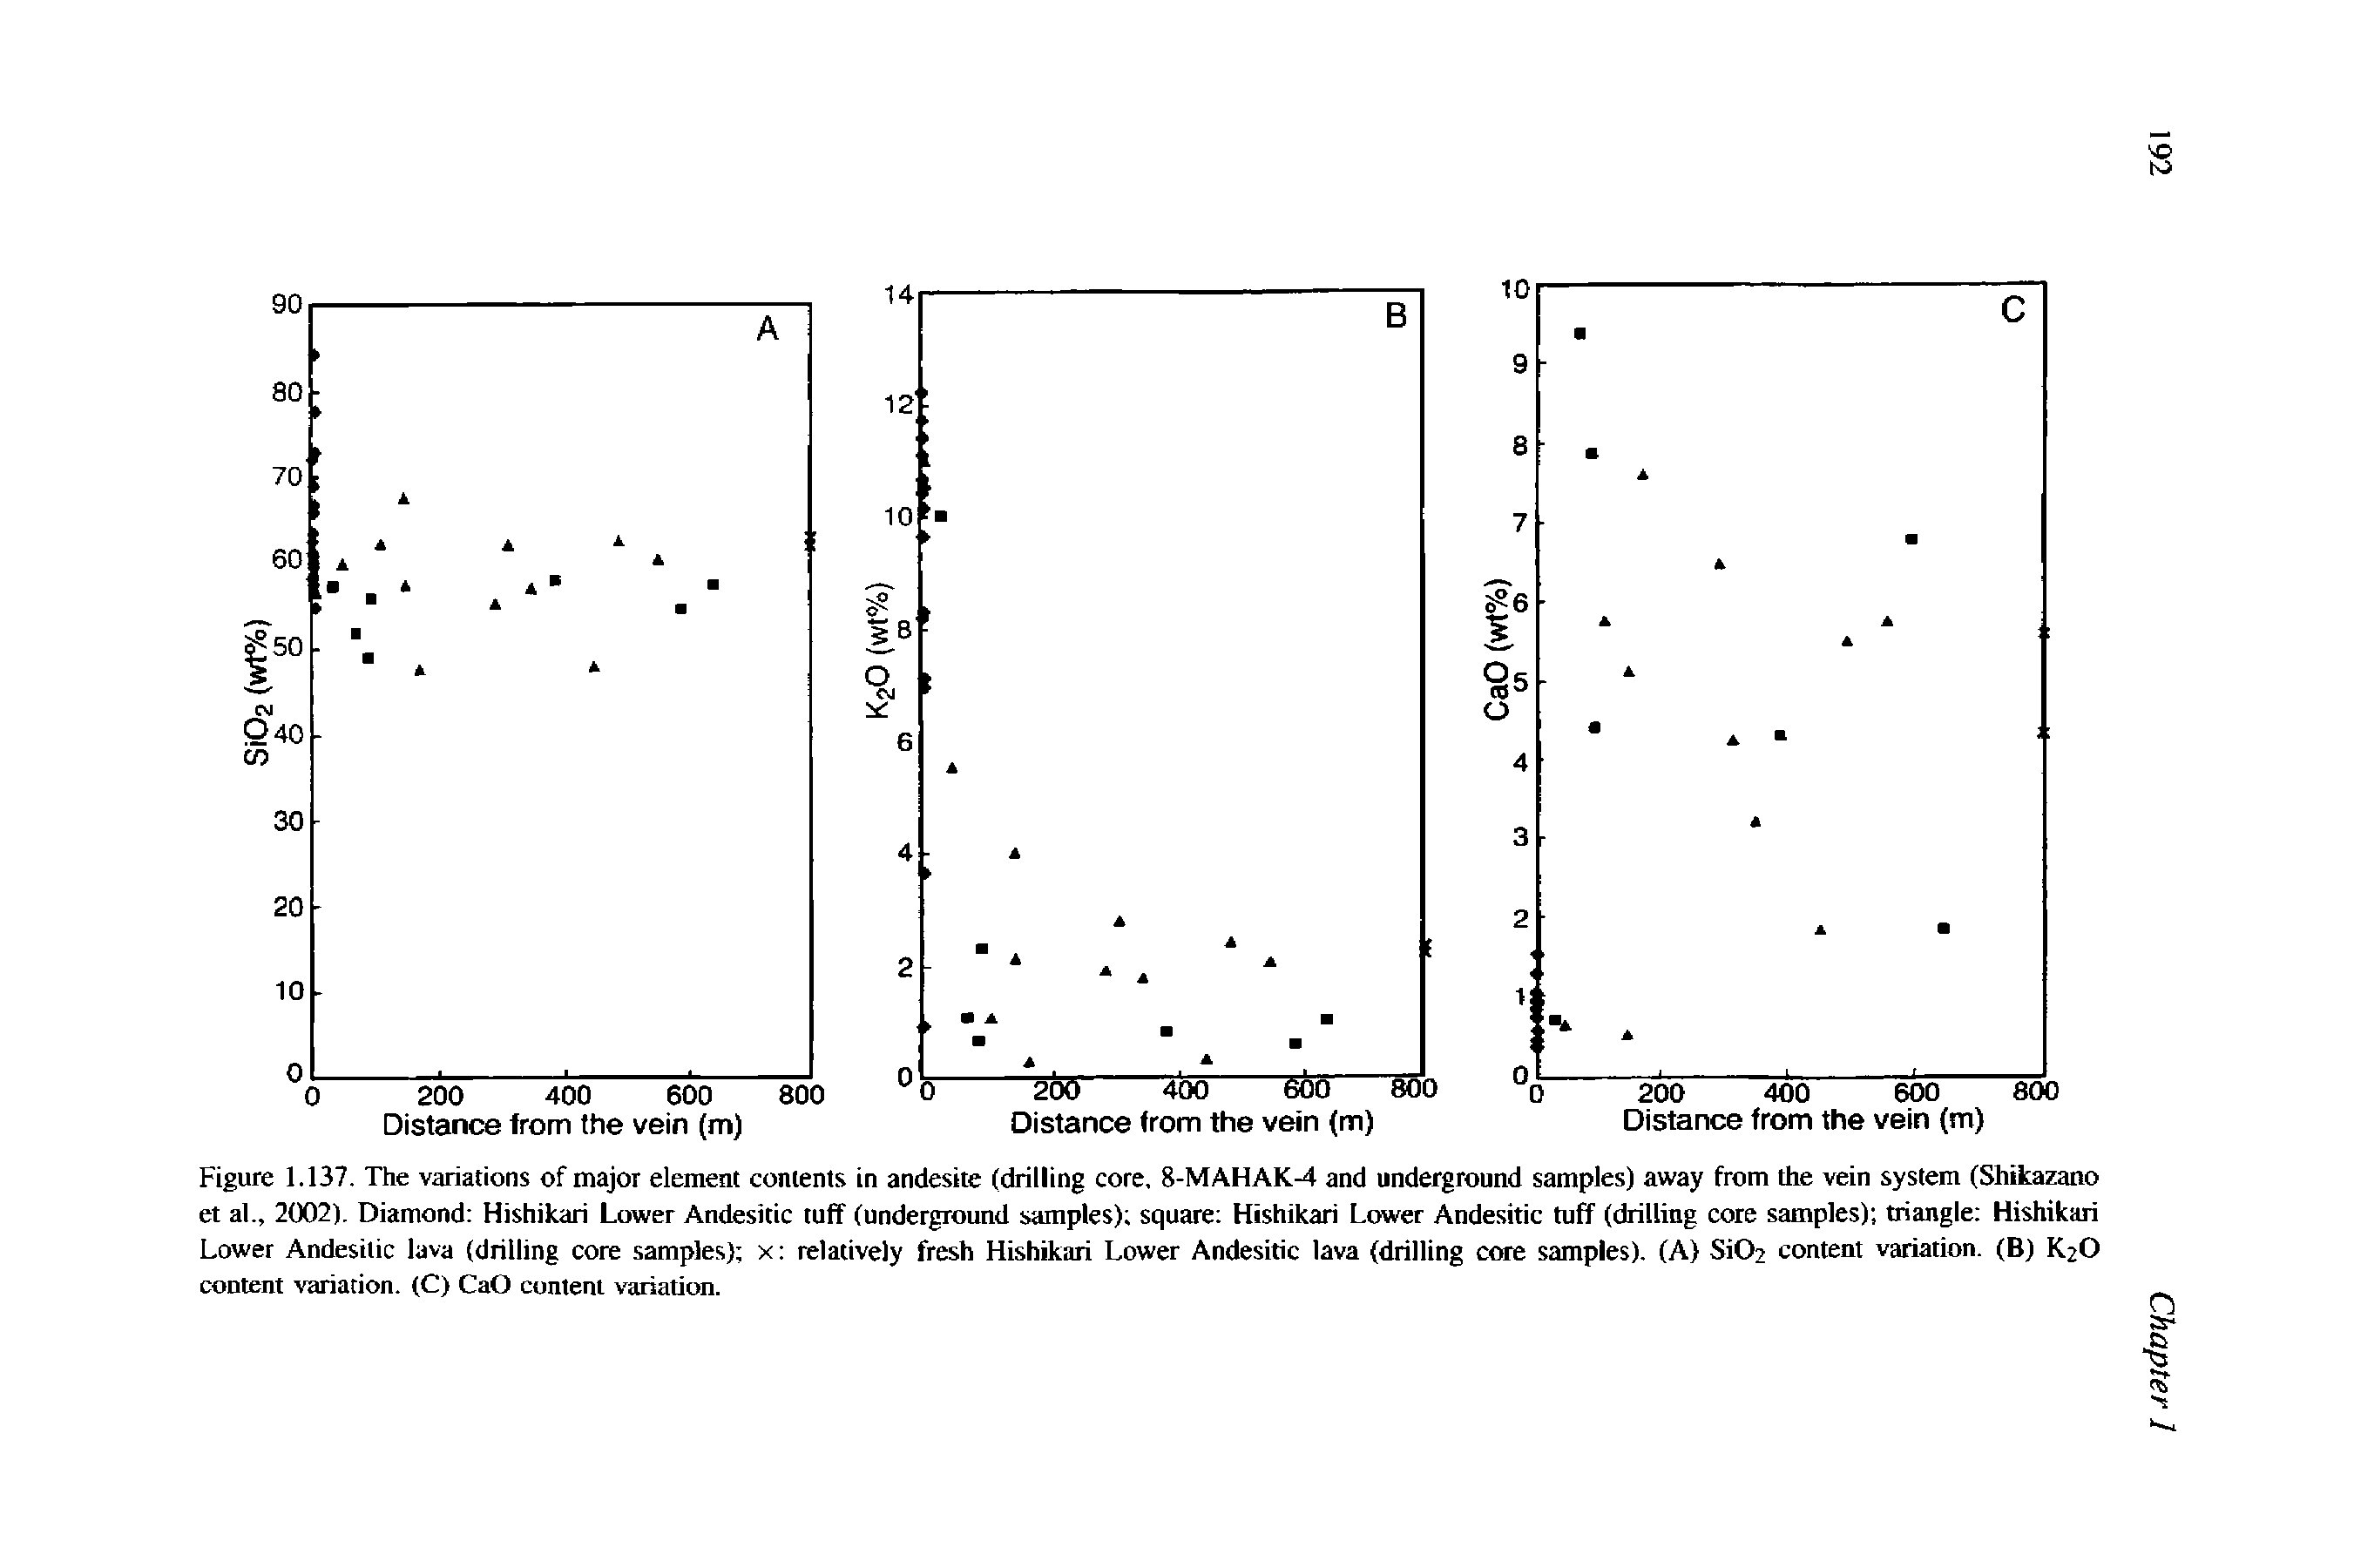 Figure 1.137. The variations of major element contents in andesite (drilling core. 8-MAHAK-4 and underground samples) away from the vein system (Shikazano et al., 2002), Diamond Hishikari Lower Andesitic tuff (underground samples) square Hishikari Lower Andesitic tuff (drilling core samples) triangle Hishikari Lower Andesitic lava (drilling core samples) x relatively fresh Hishikari Lower Andesitic lava (drilling core samples). (A) SiO content variation. (B) K2O content variation. (C) CaO content variation.